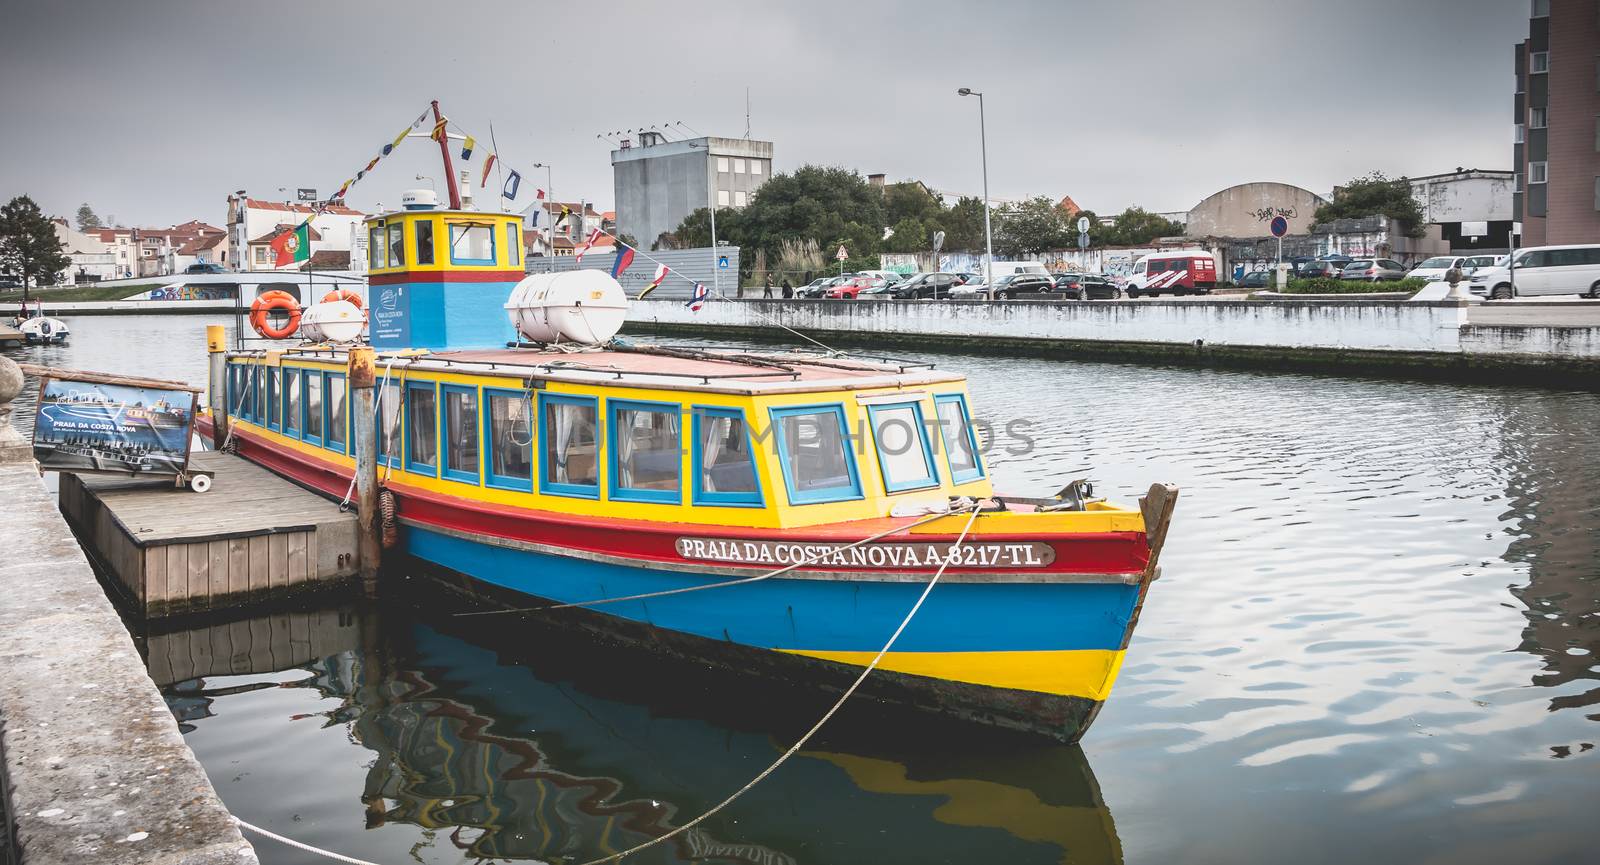 Tourist transport boat docked at the end of the day in aveiro, p by AtlanticEUROSTOXX